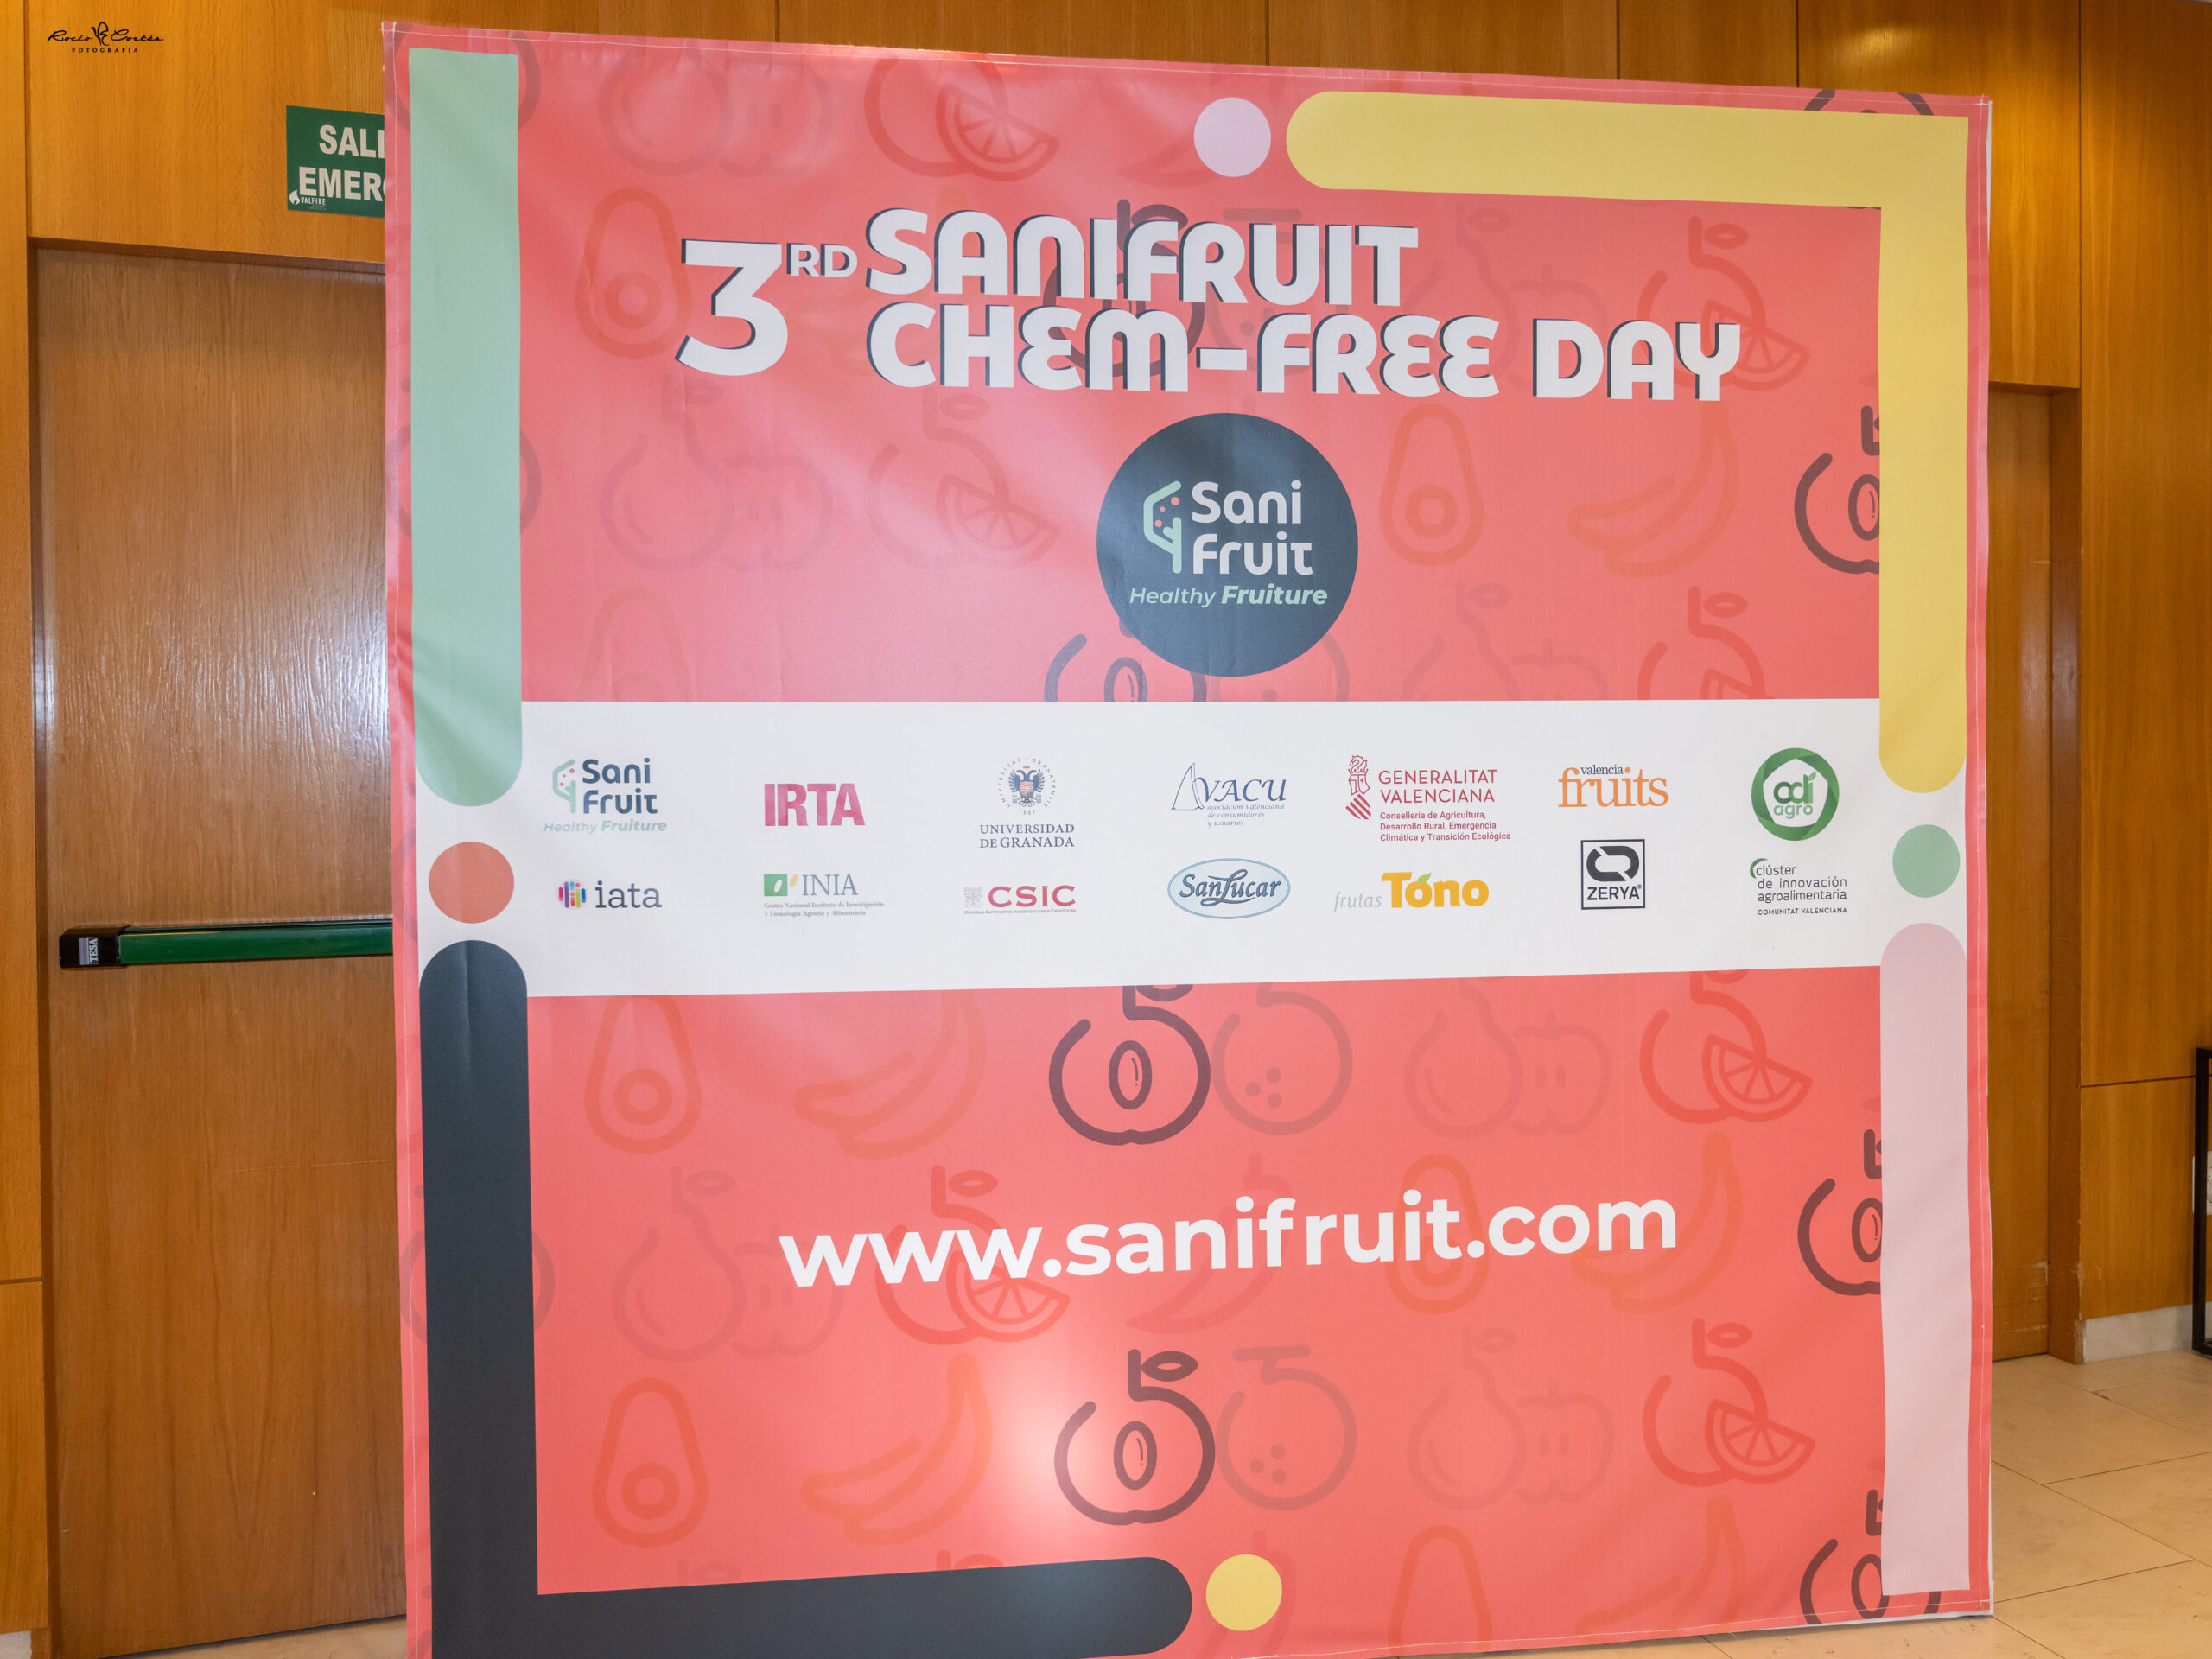 OUR 3RD SANIFRUIT CHEM-FREE DAY